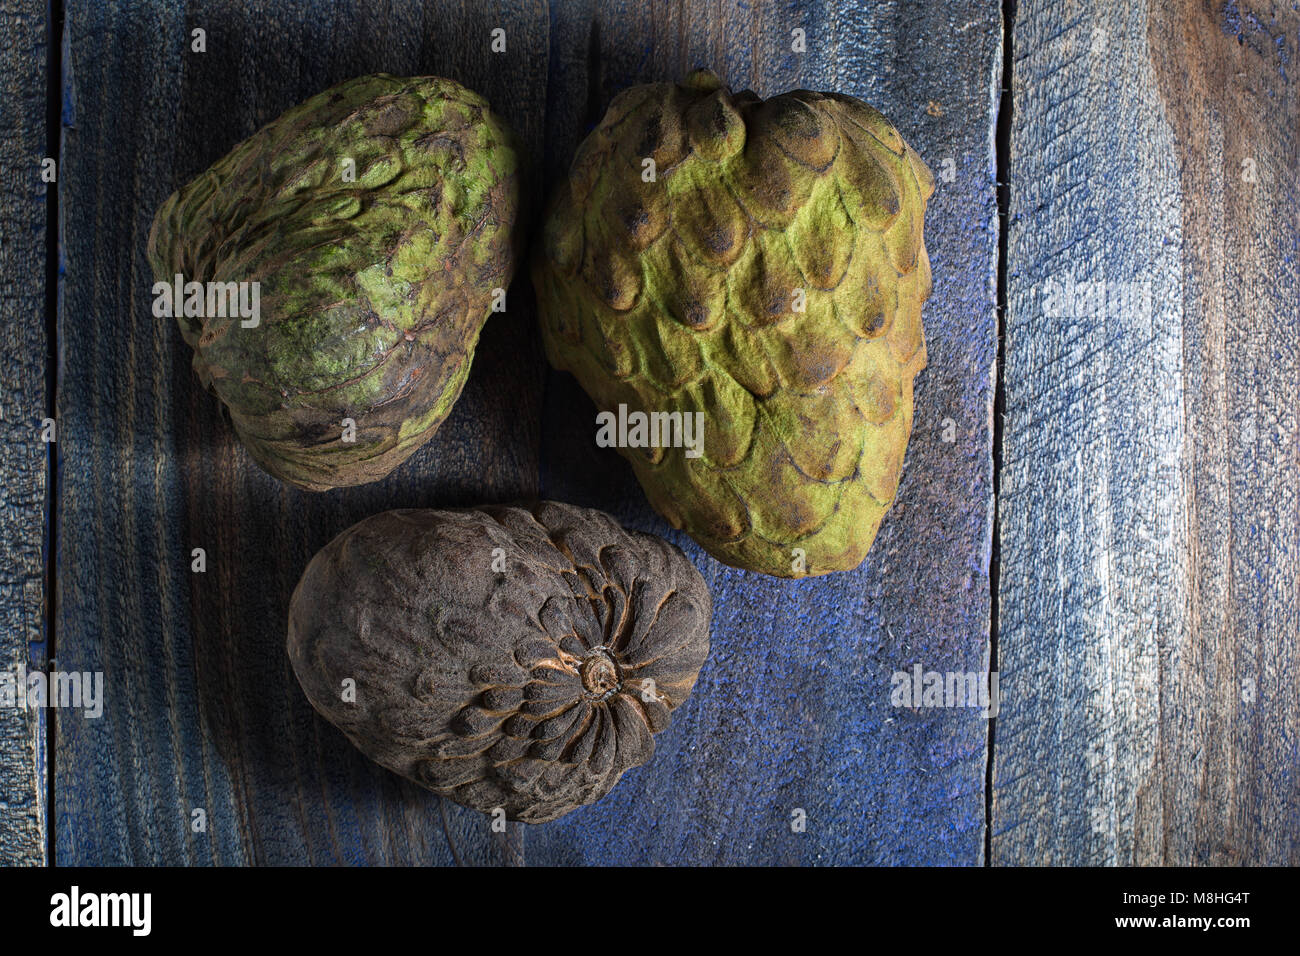 cherimoya fruits also known as custard apple on rustic background Stock Photo